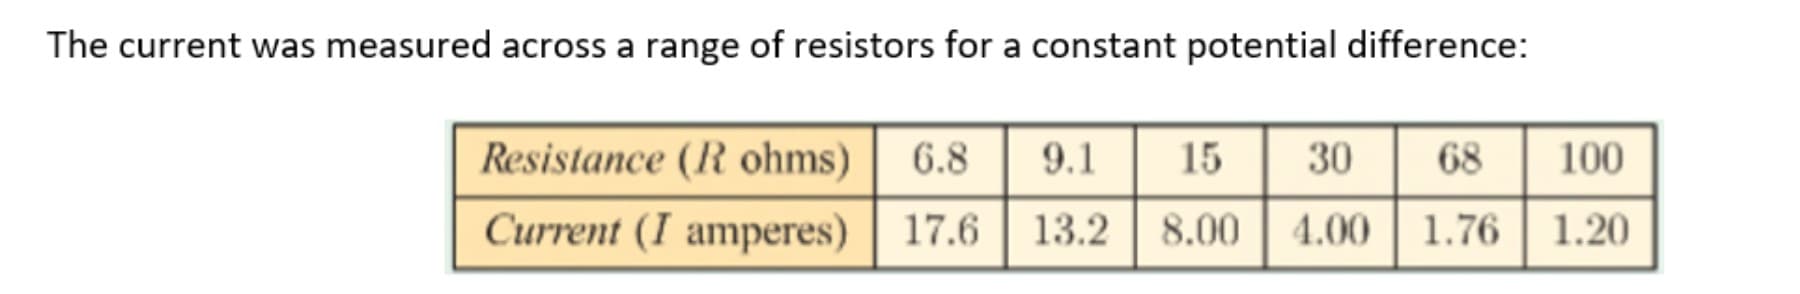 The current was measured across a range of resistors for a constant potential difference:
Resistance (R ohms)
6.8
9.1
15
30
68
100
Current (I amperes) | 17.6
13.2
8.00
4.00
1.76
1.20
